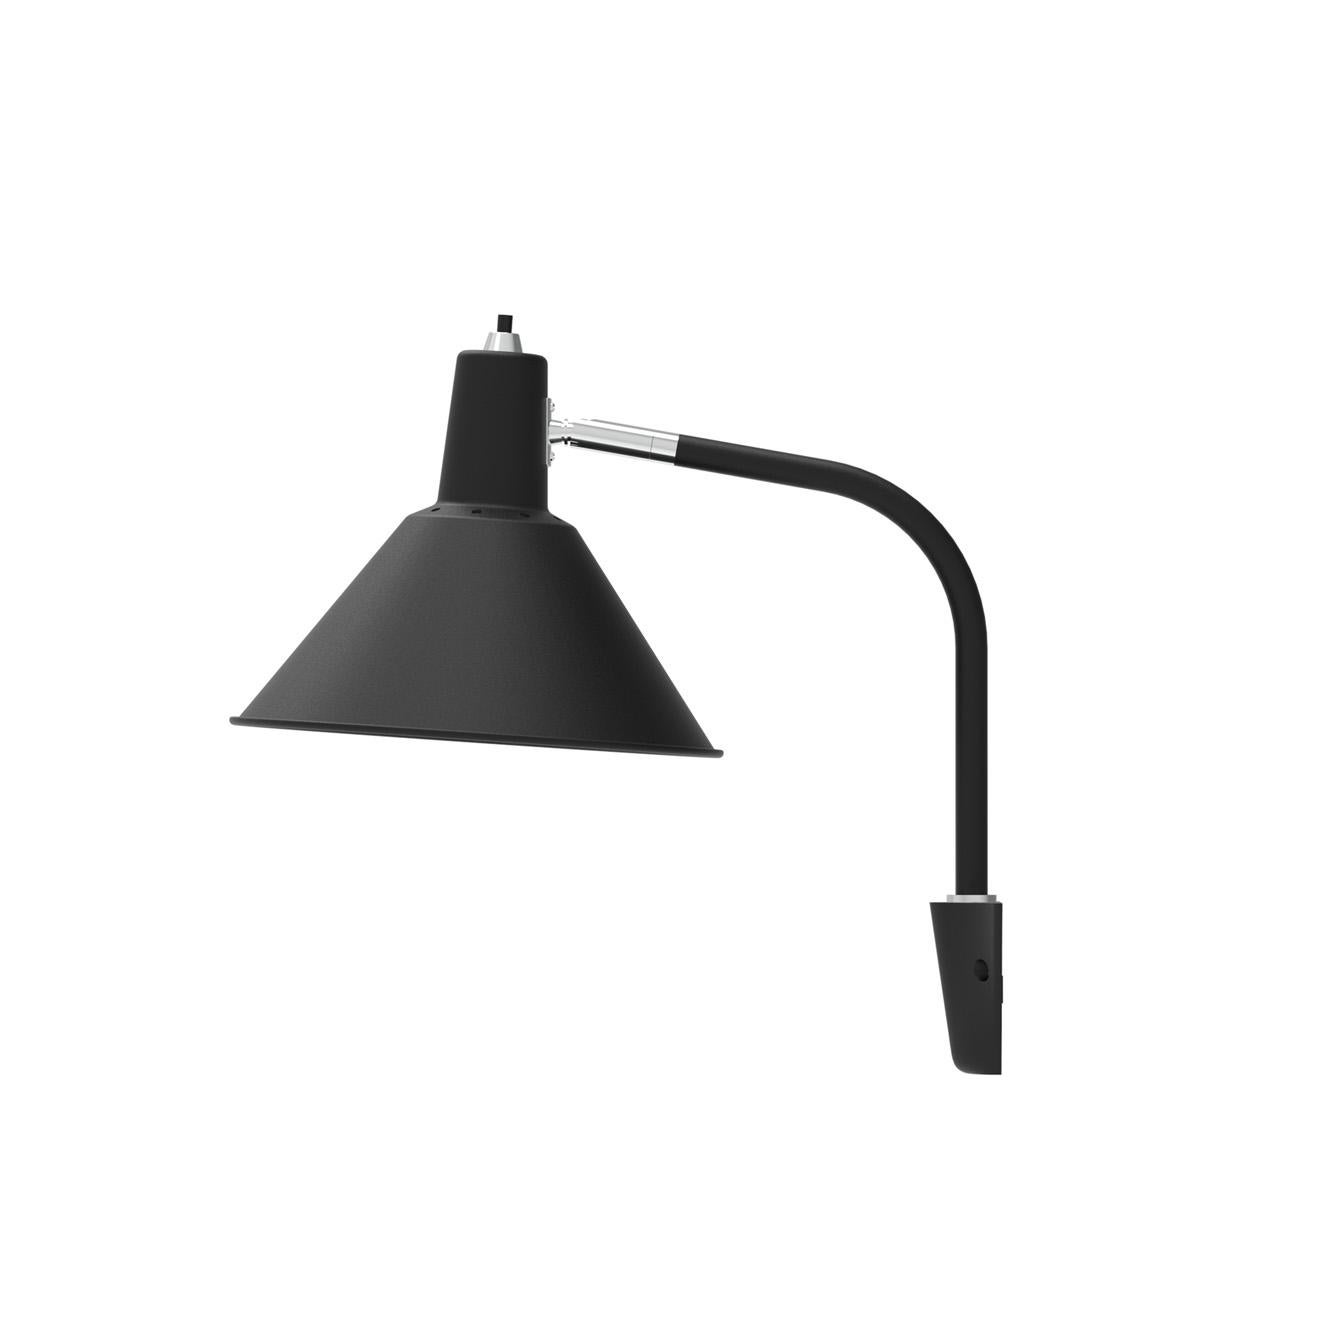 Plated Arcon Wall Lamp in Black/Chrome - By NUAD For Sale